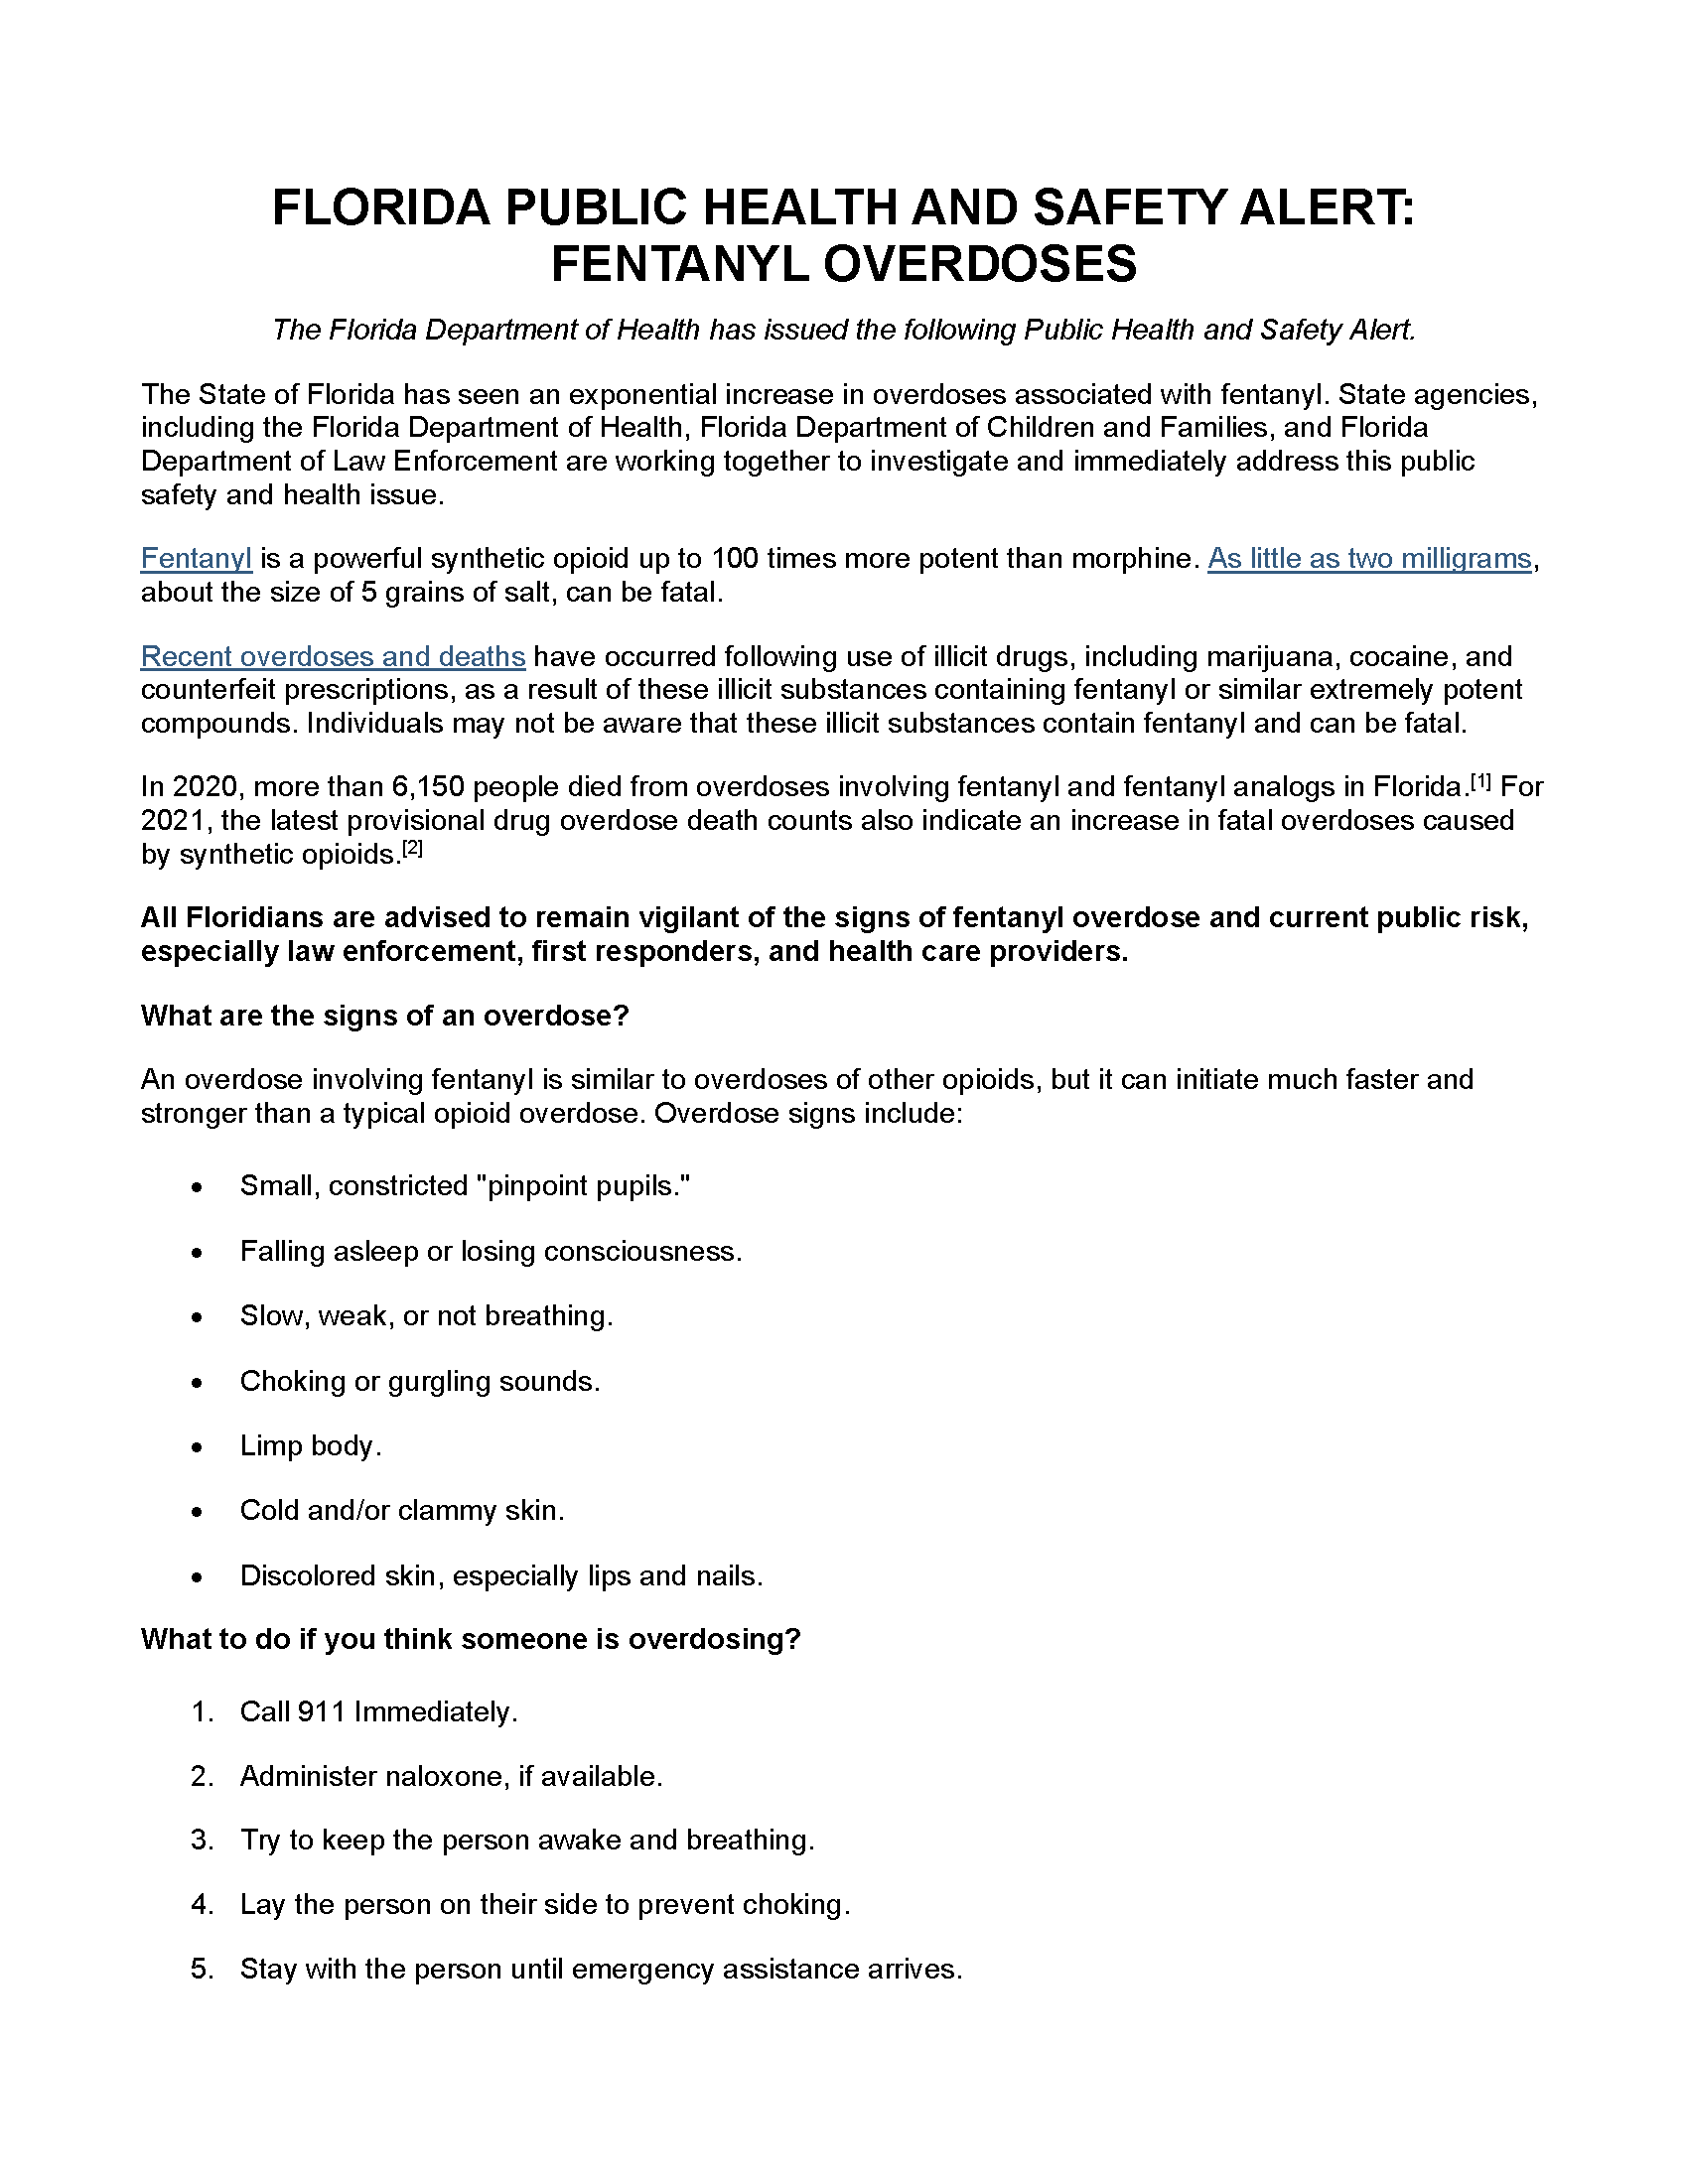 FLORIDA PUBLIC HEALTH AND SAFETY ALERT - FENTANYL OVERDOSES_Page_1